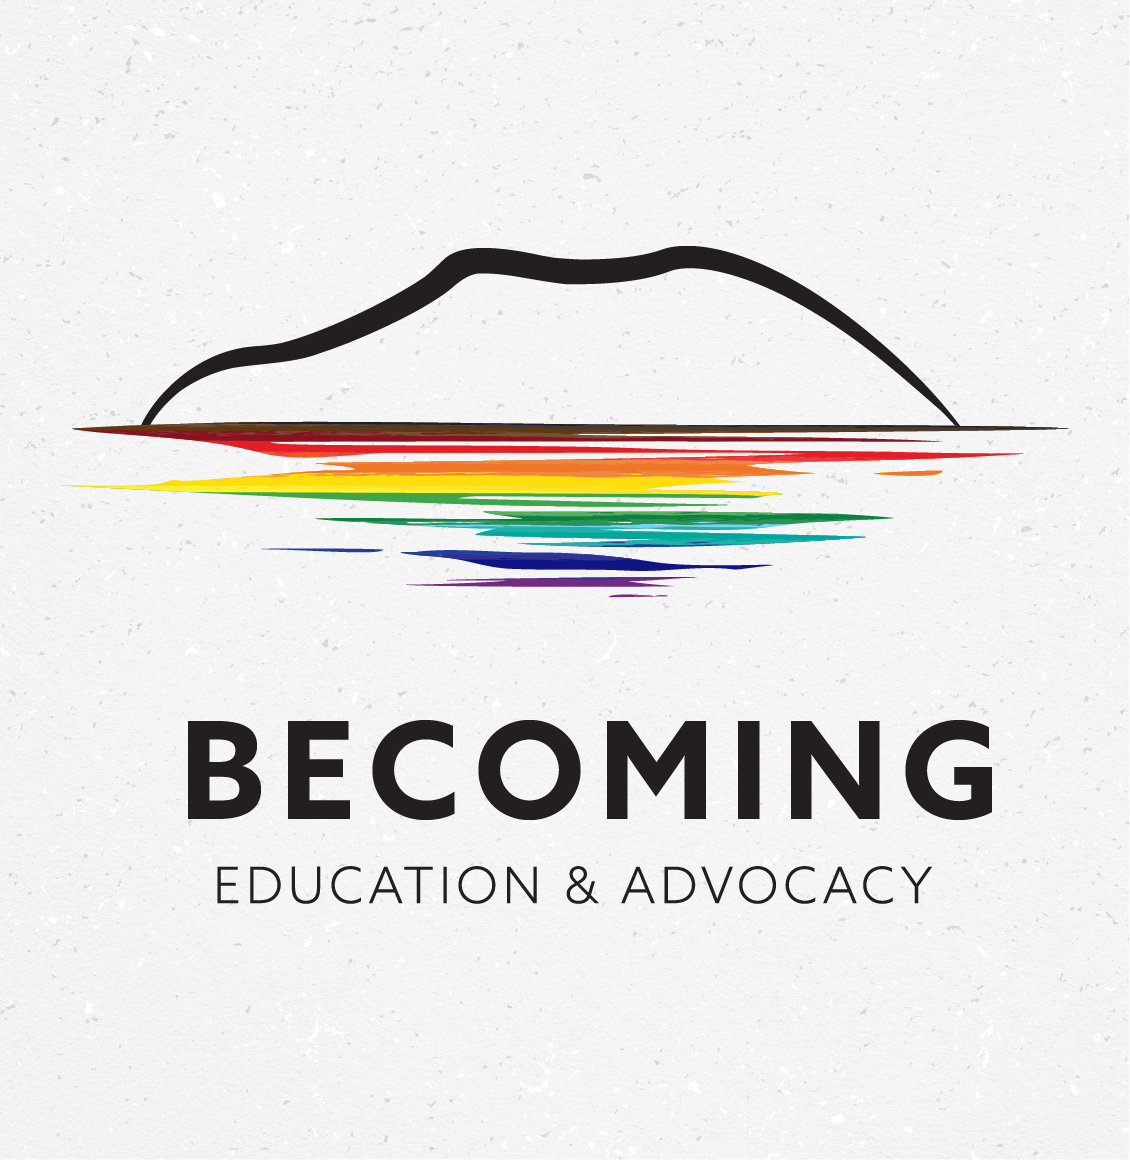 Becoming - Education and Advocacy